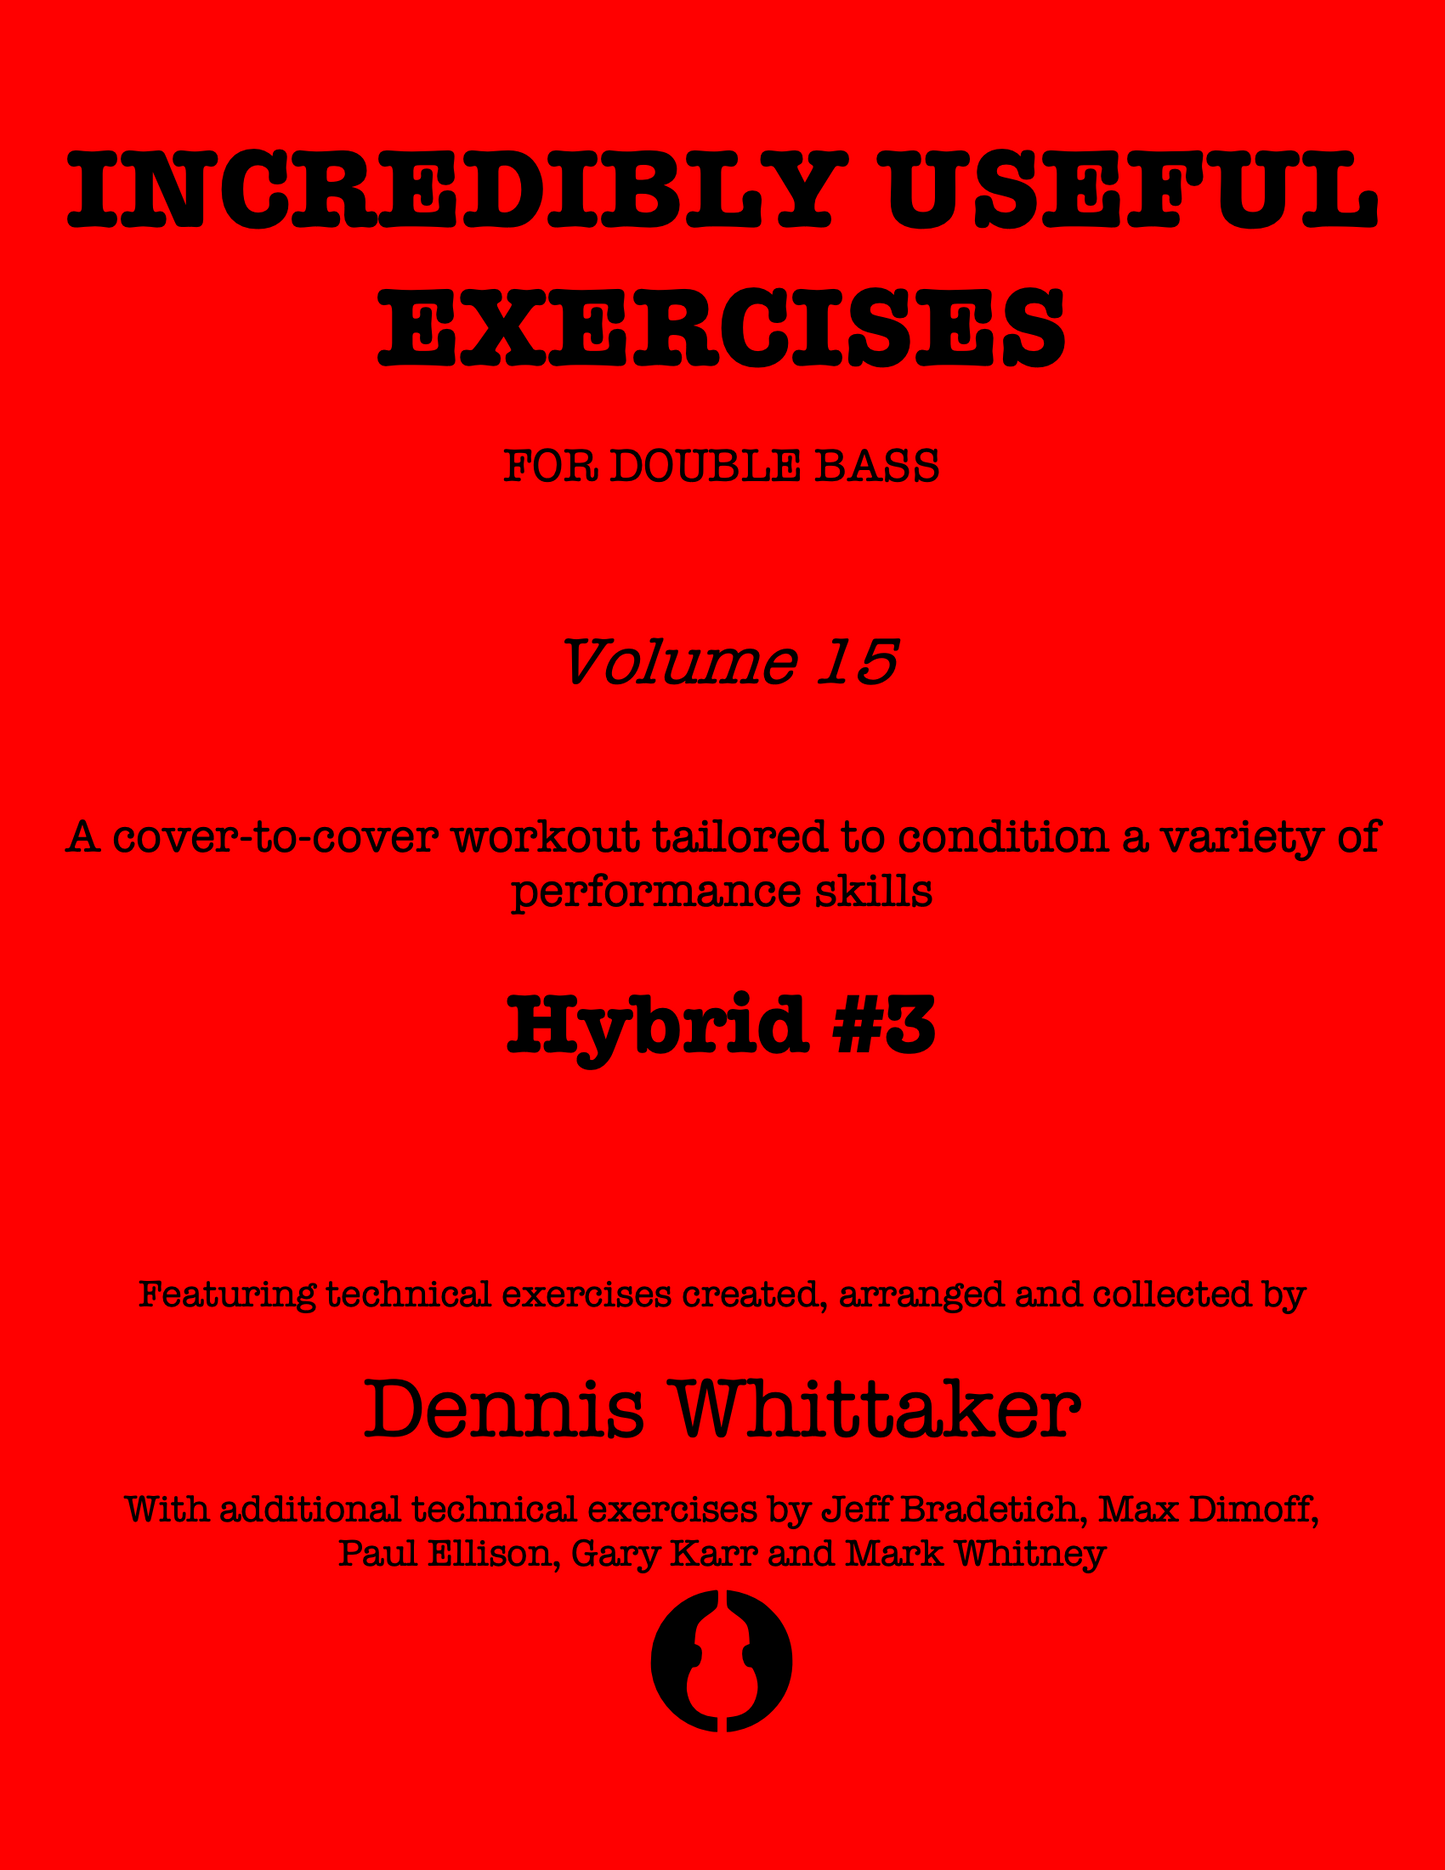 Incredibly Useful Exercises for Double Bass, Vol. 15, Hybrid Workout #3